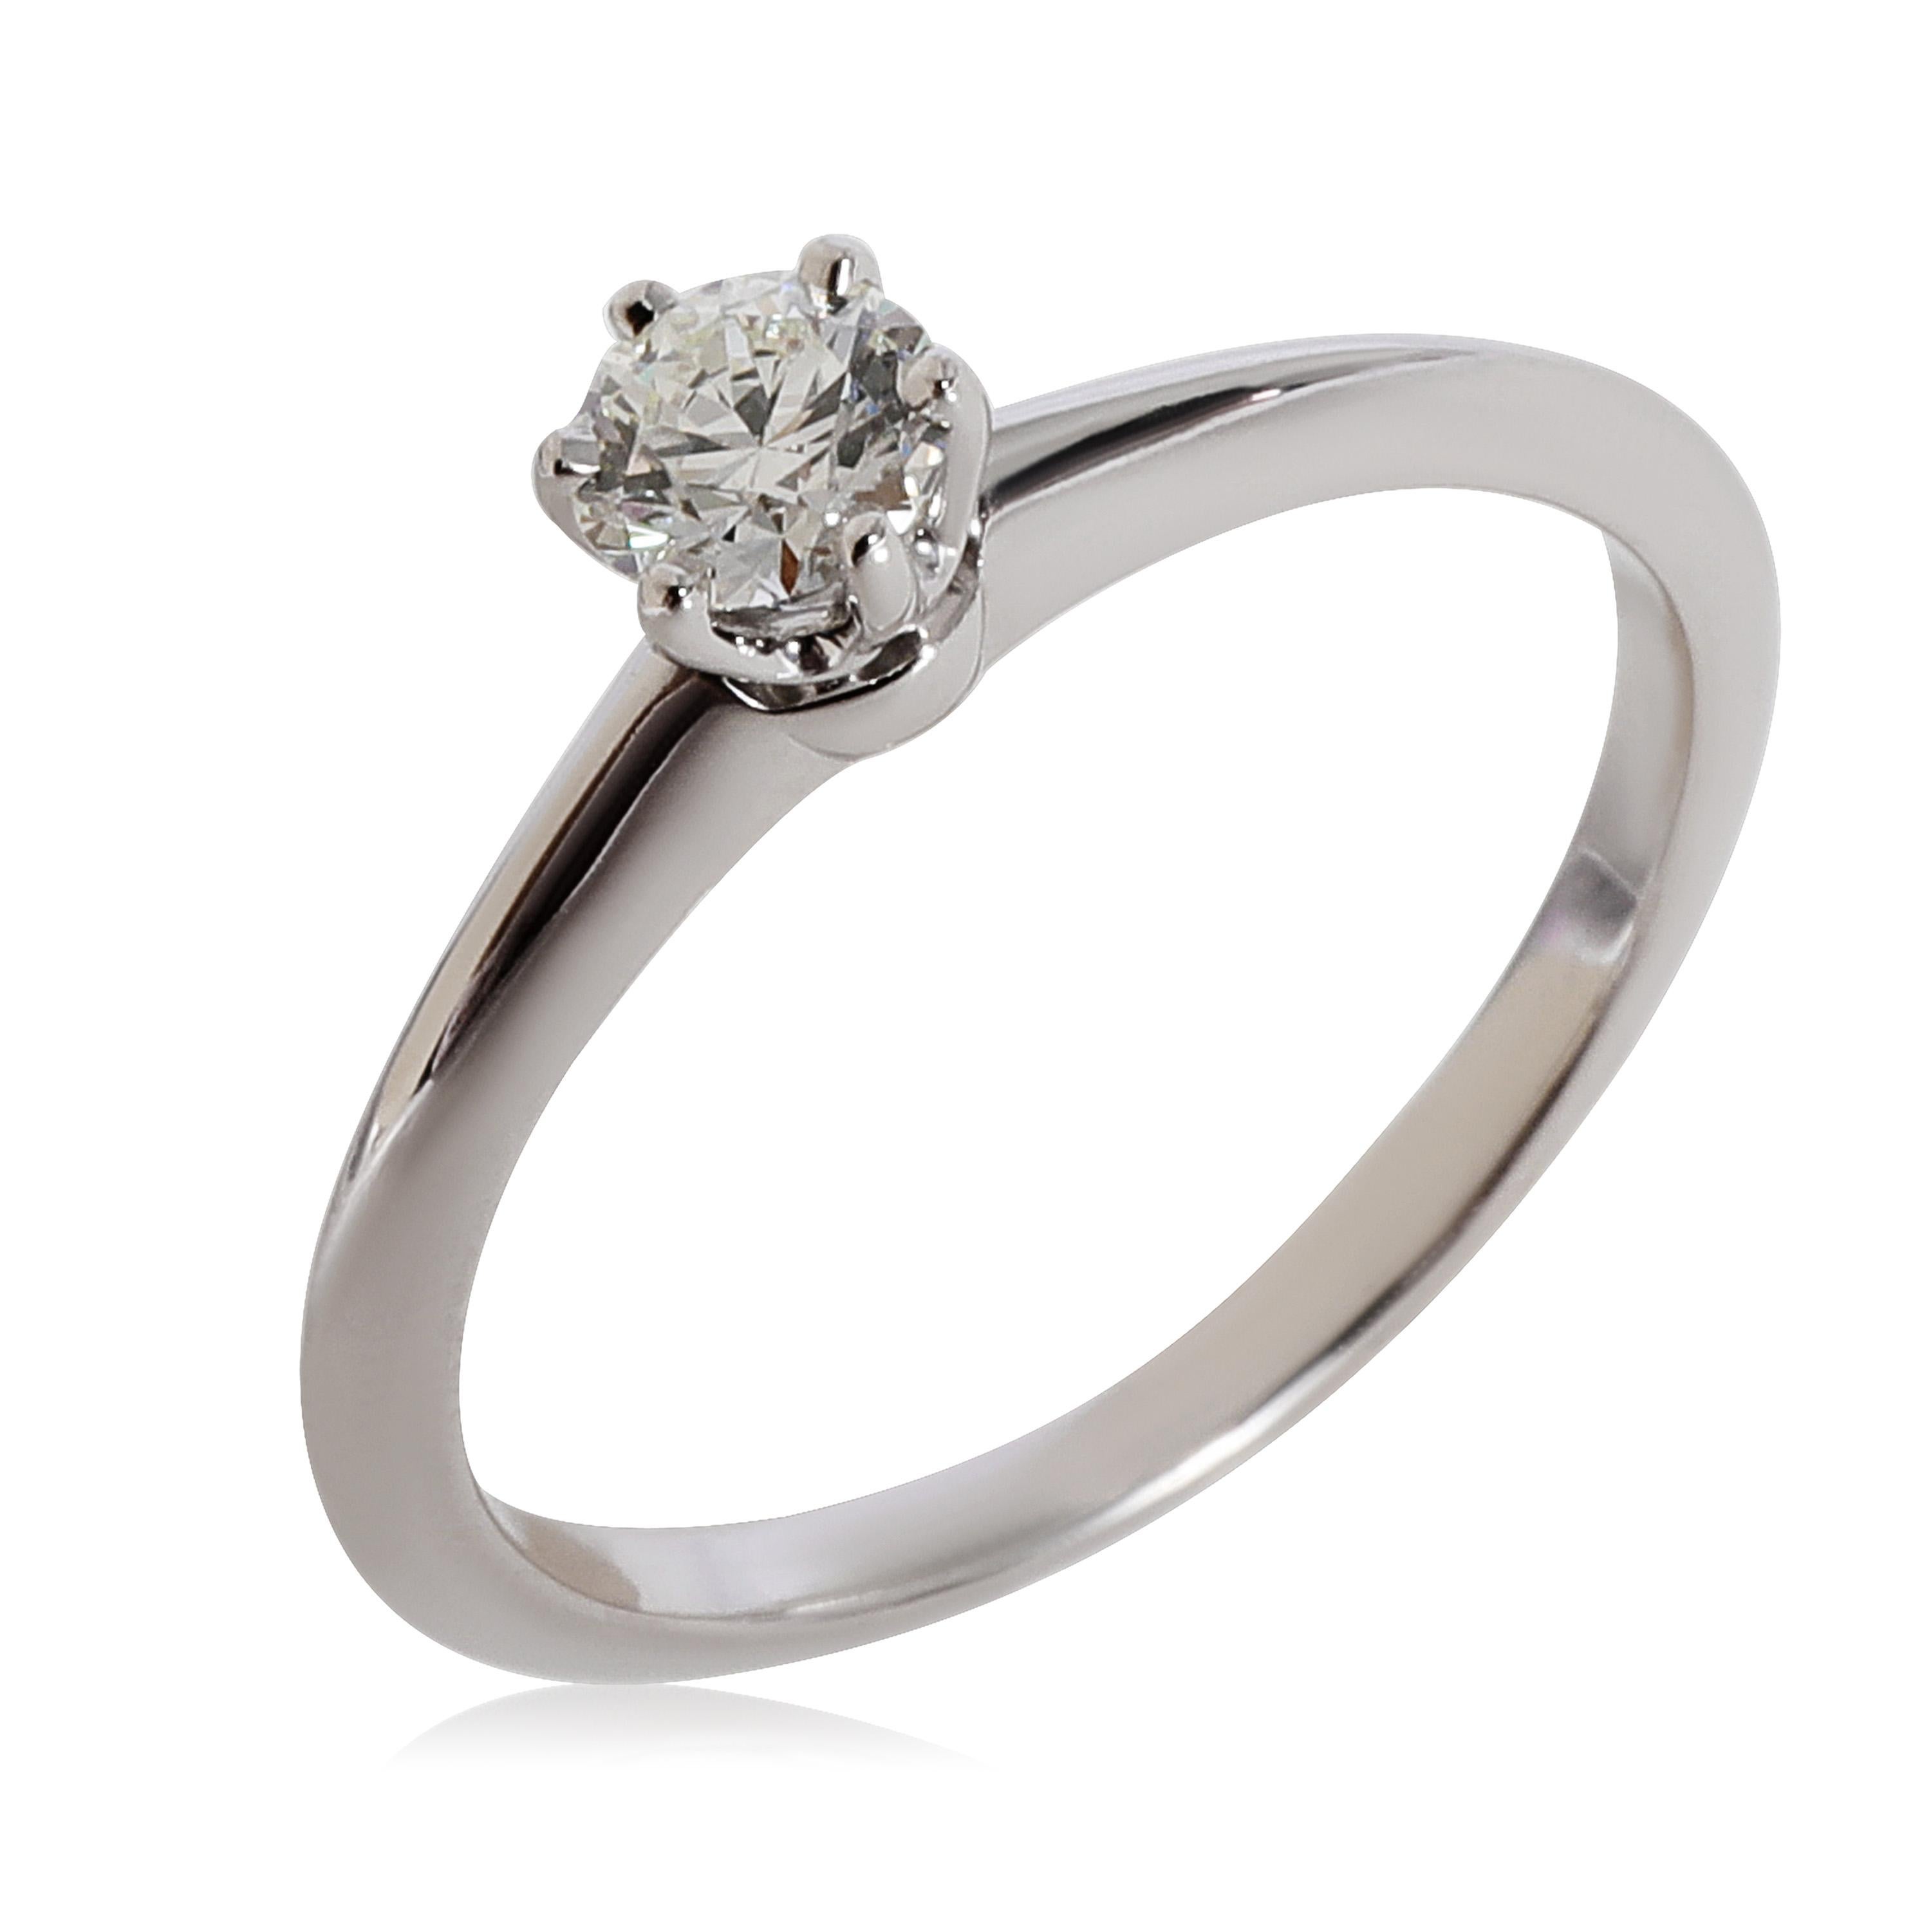 Tiffany & Co. Diamond Solitaire Ring in Platinum H VS1 0.26 CTW

PRIMARY DETAILS
SKU: 125078
Listing Title: Tiffany & Co. Diamond Solitaire Ring in Platinum H VS1 0.26 CTW
Condition Description: Retails for 2000 USD. In excellent condition and